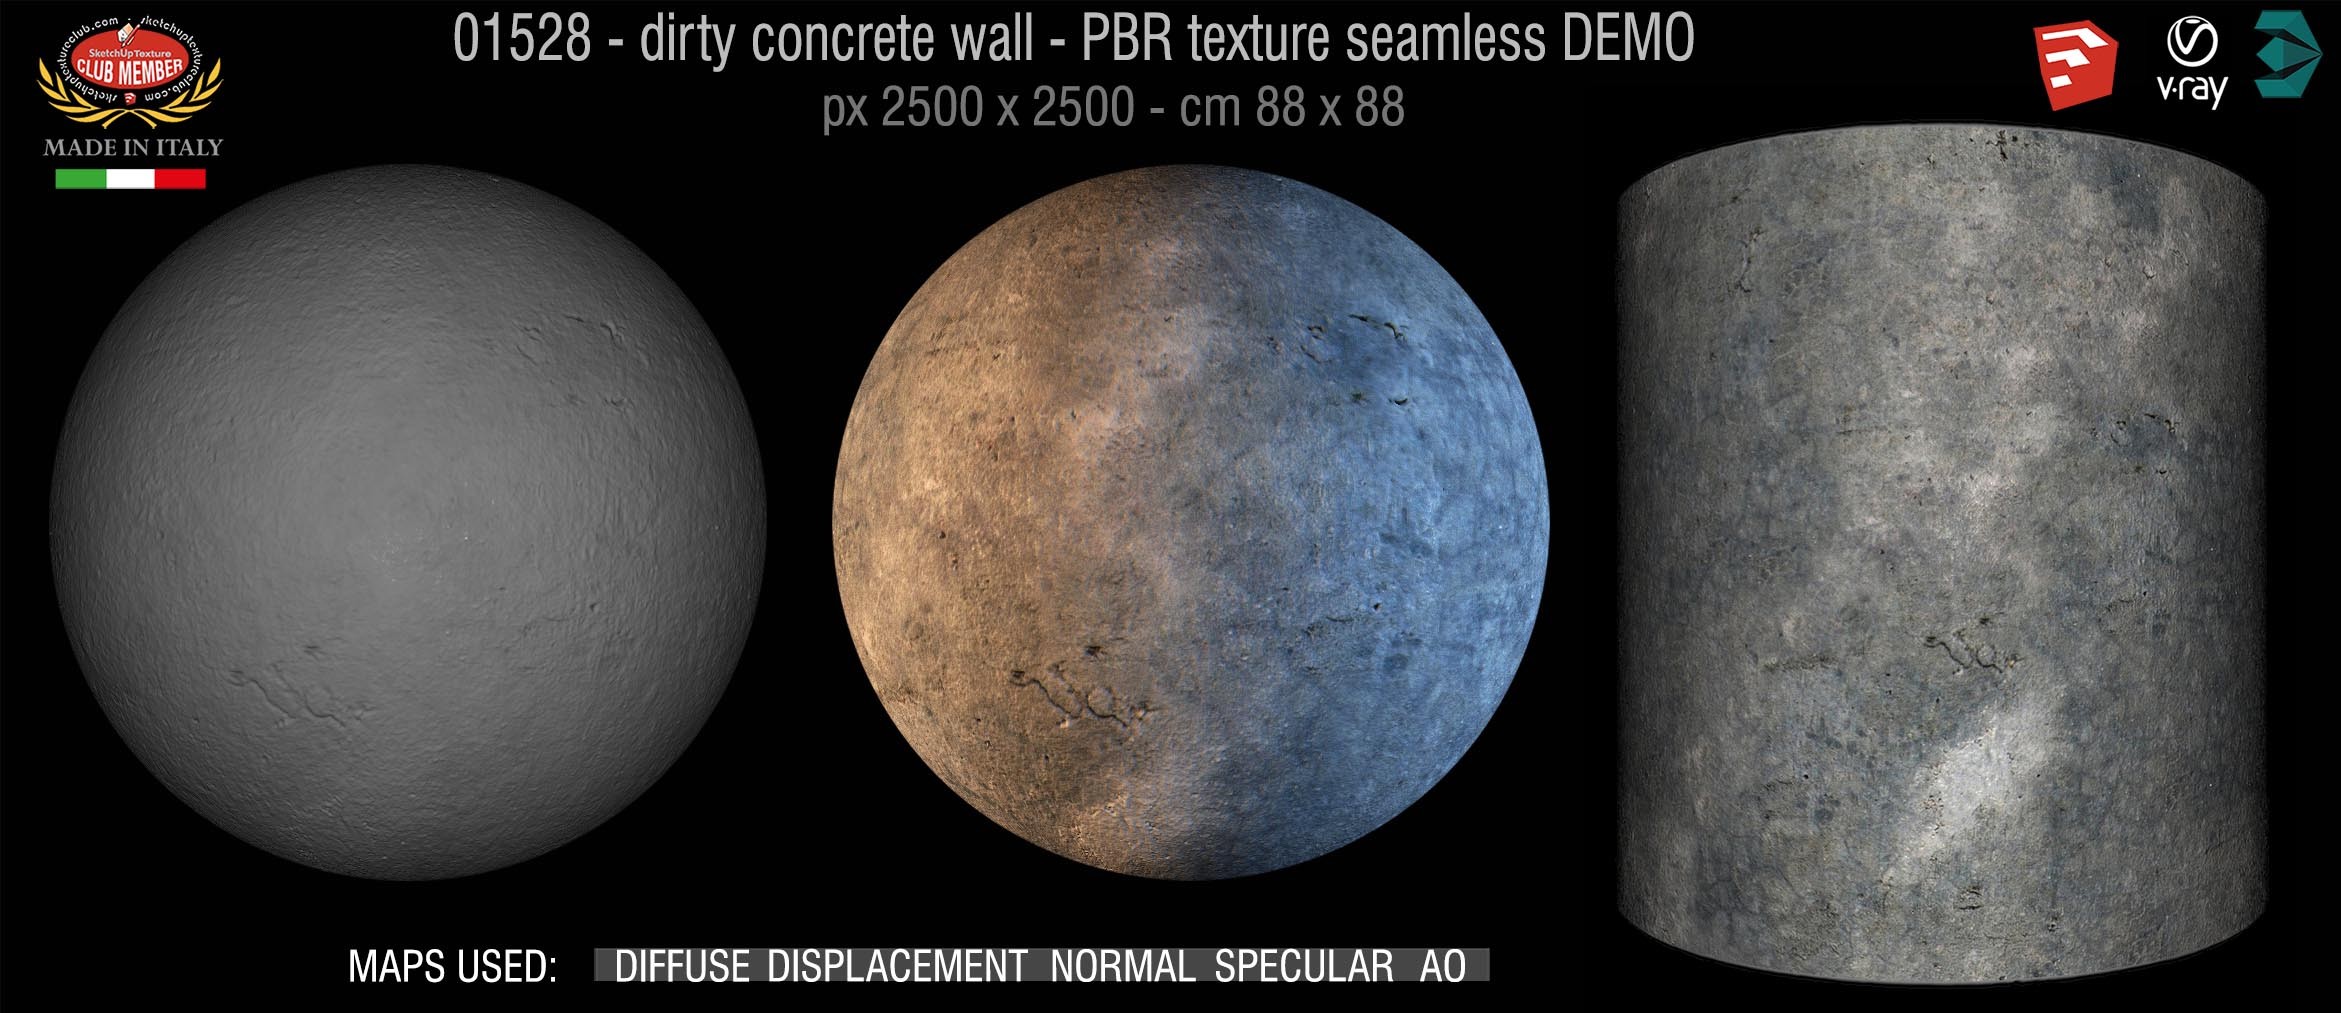 01528 Concrete bare dirty wall PBR texture seamless DEMO